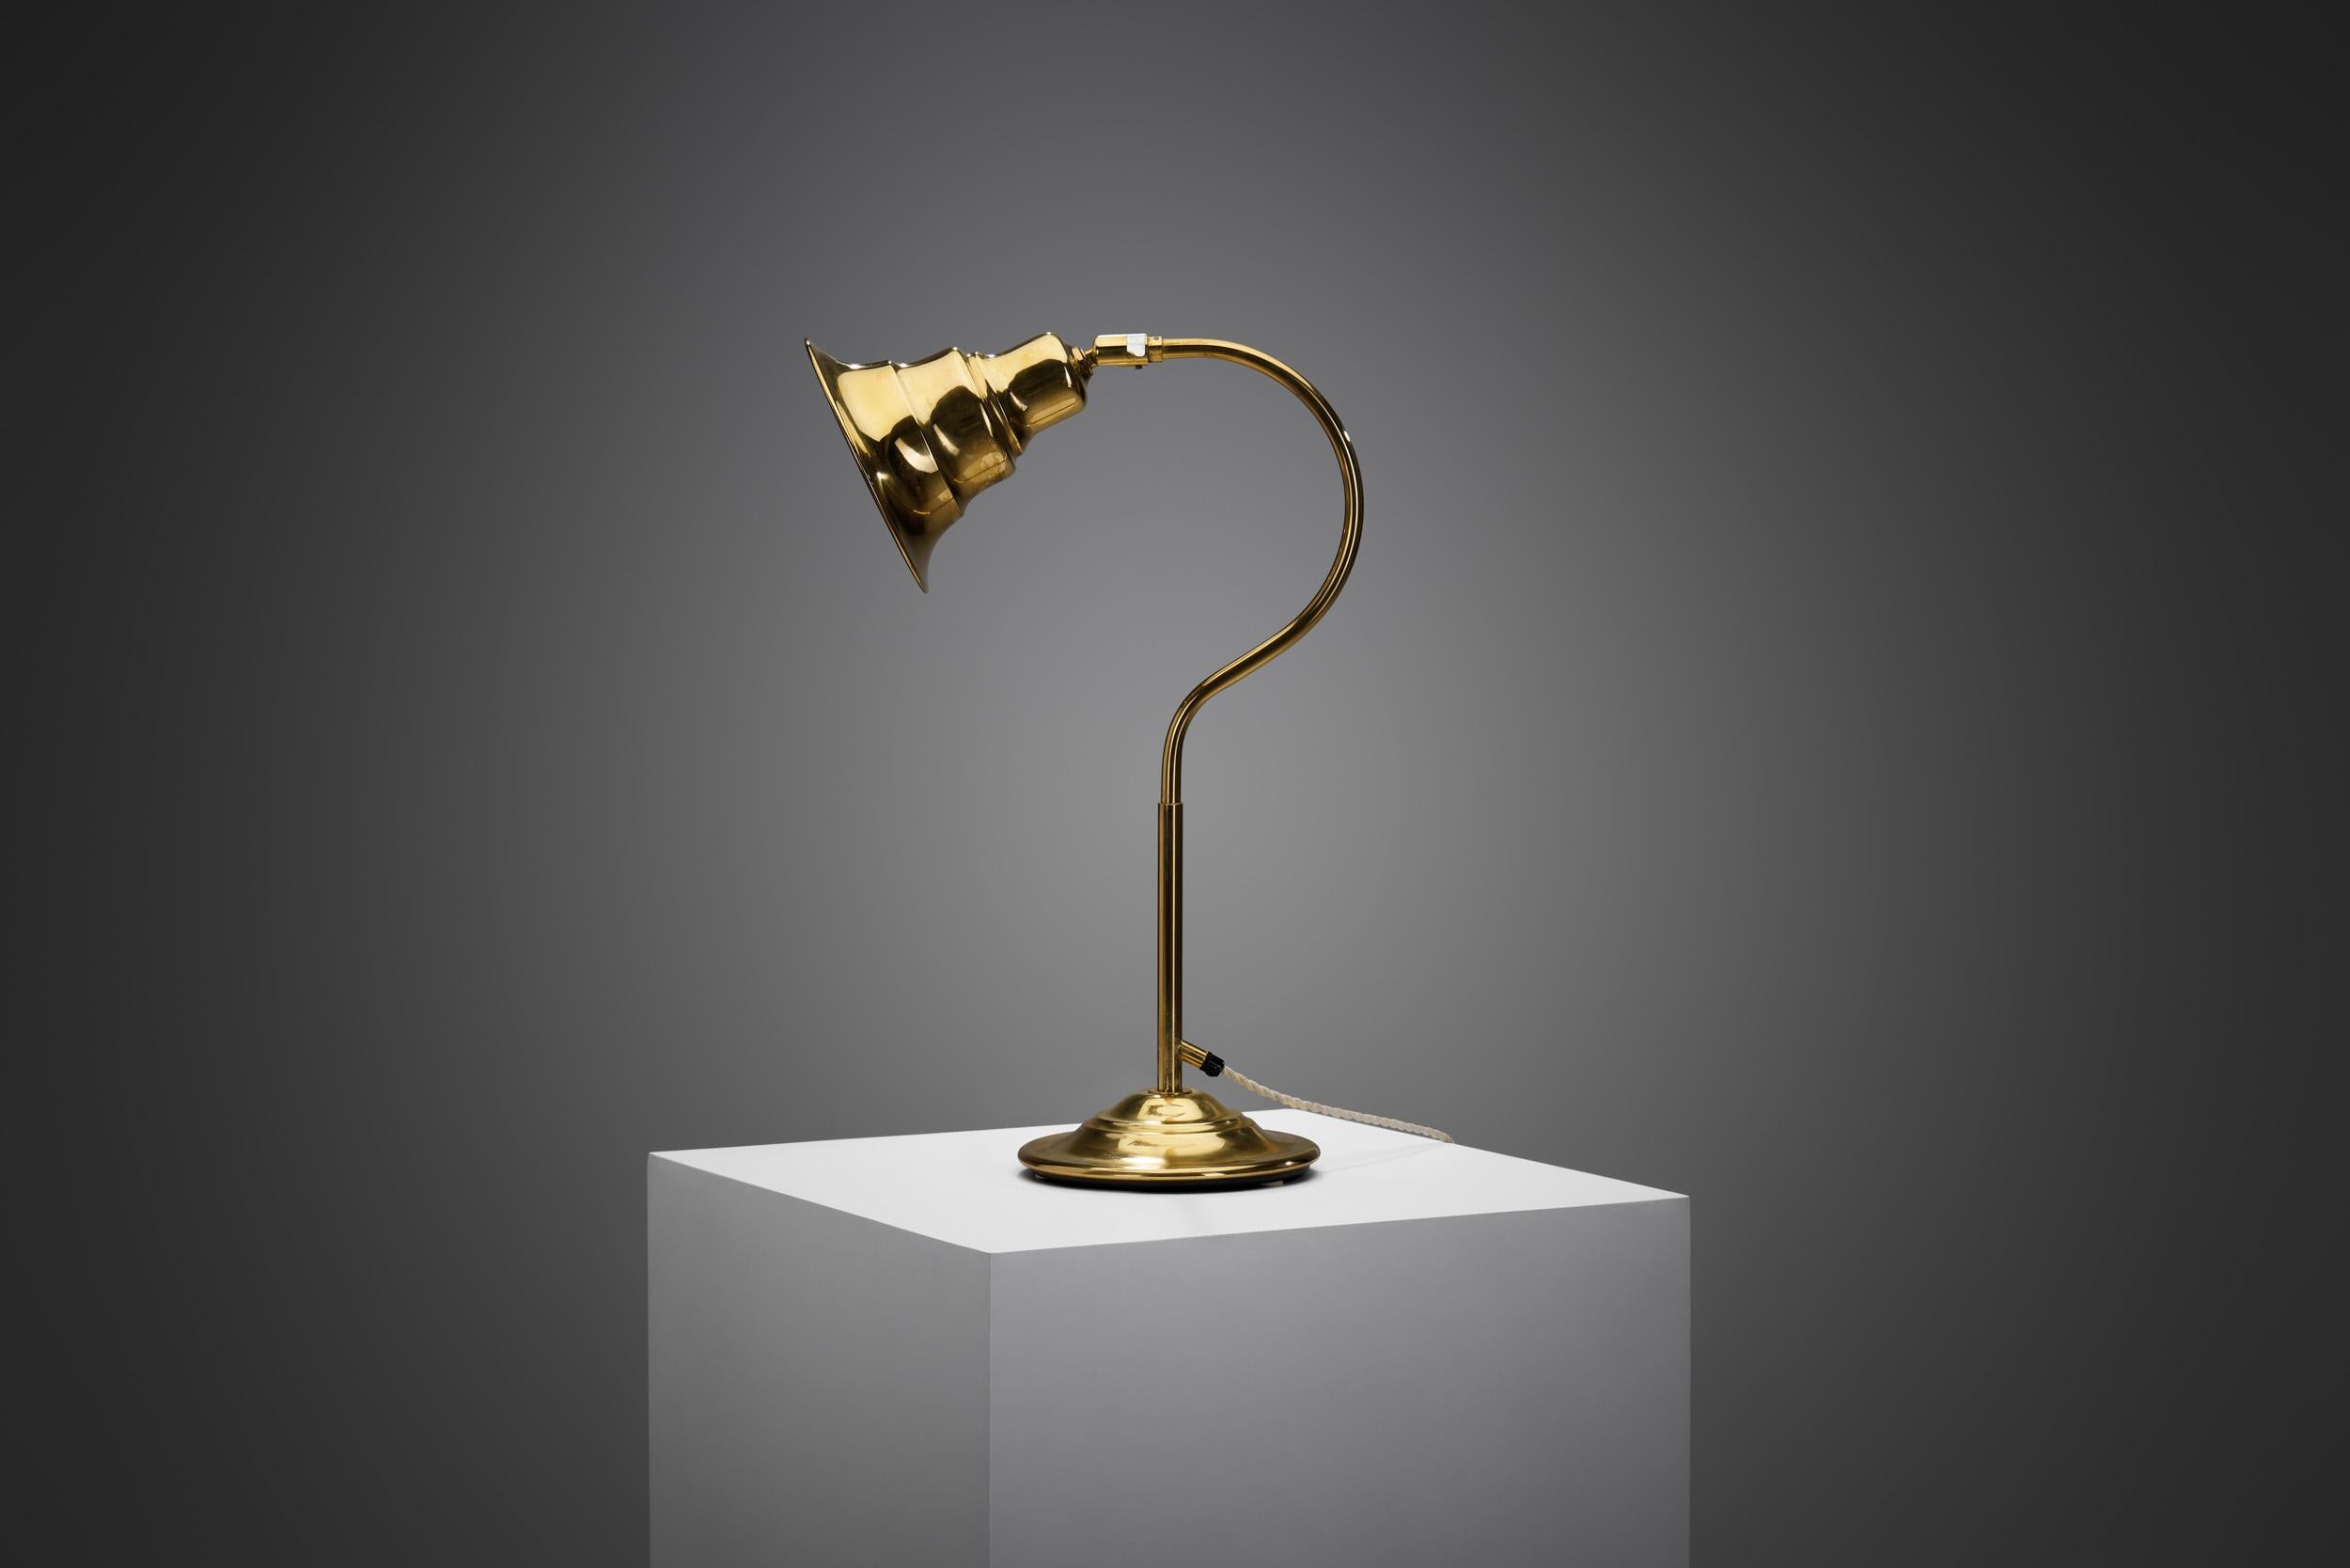 Late 20th Century Jan Wickelgren Curved Brass Table Lamp for Aneta Belysning AB, Sweden, 1970s For Sale